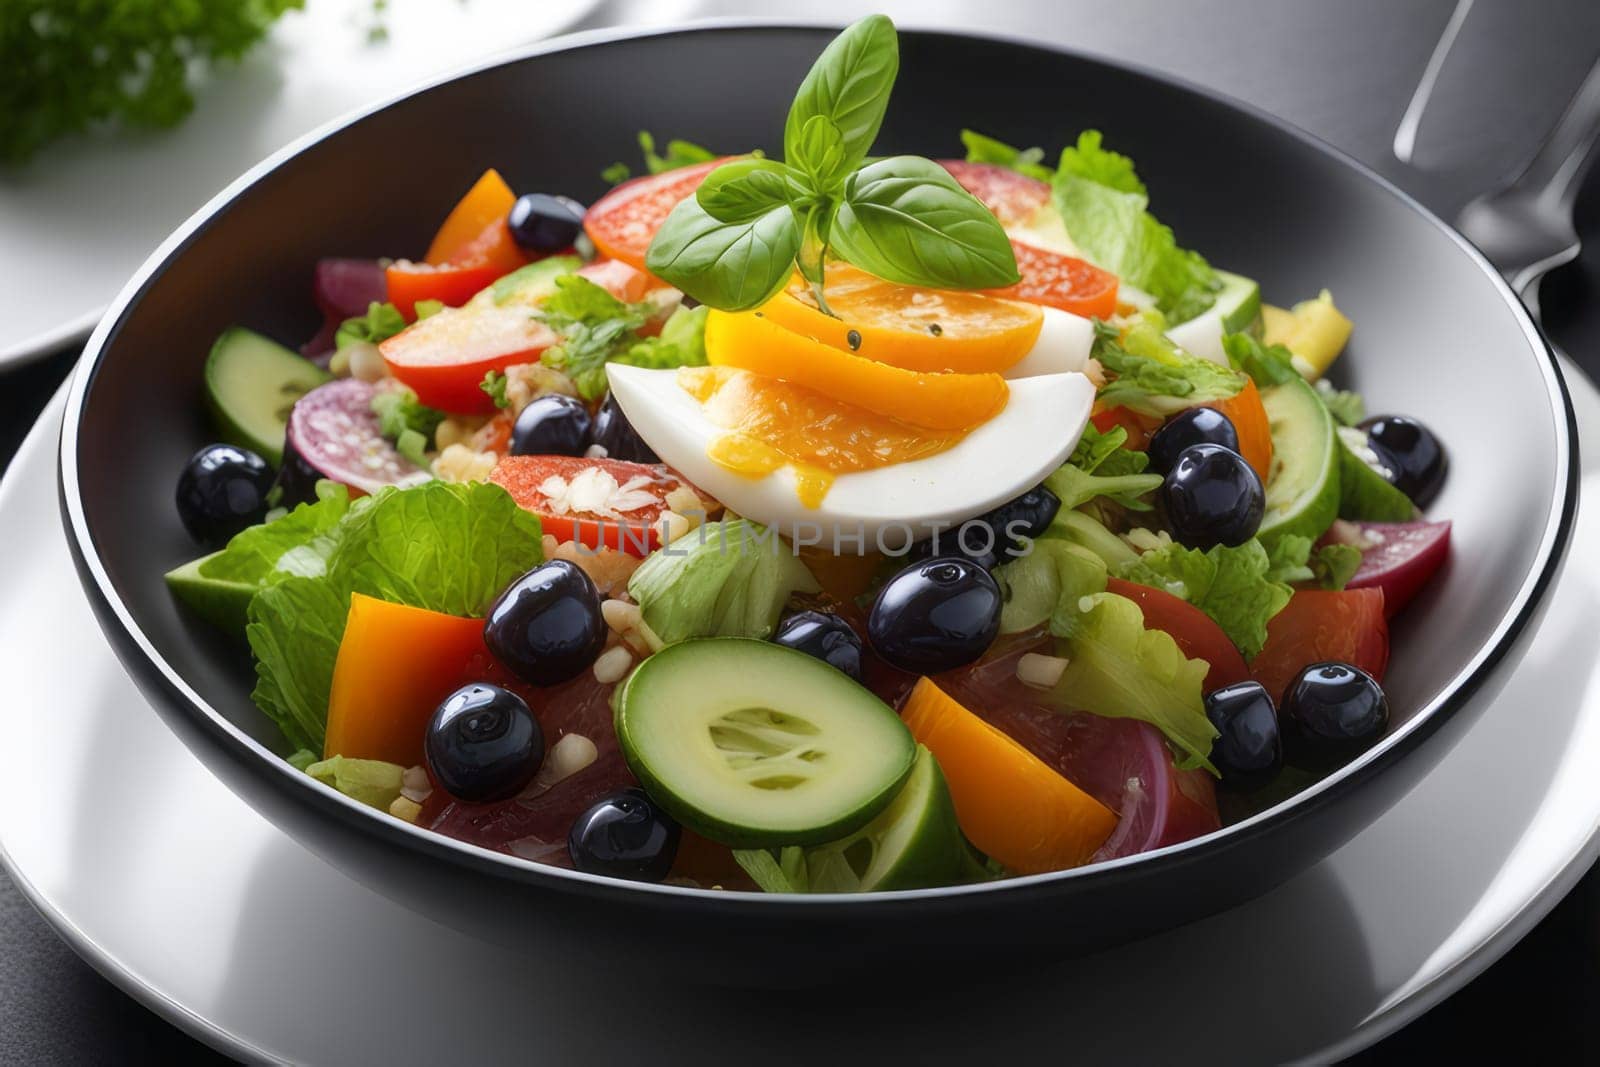 Fresh and colorful vegetarian salad presented in a deep dish on a café table, showcasing a harmonious composition against the clean white background.